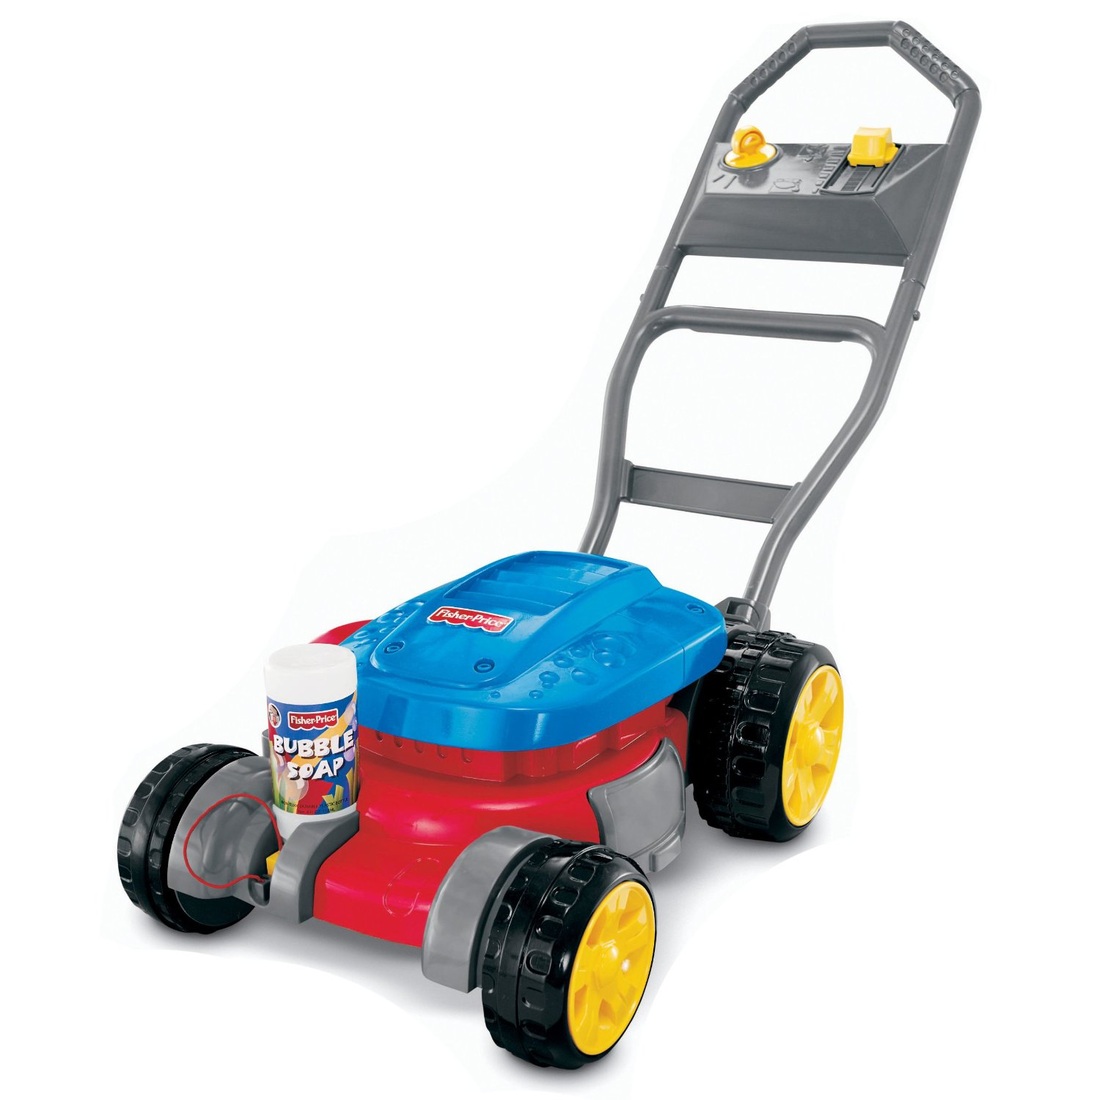 FISHER PRICE LAWN MOWER BUBBLE